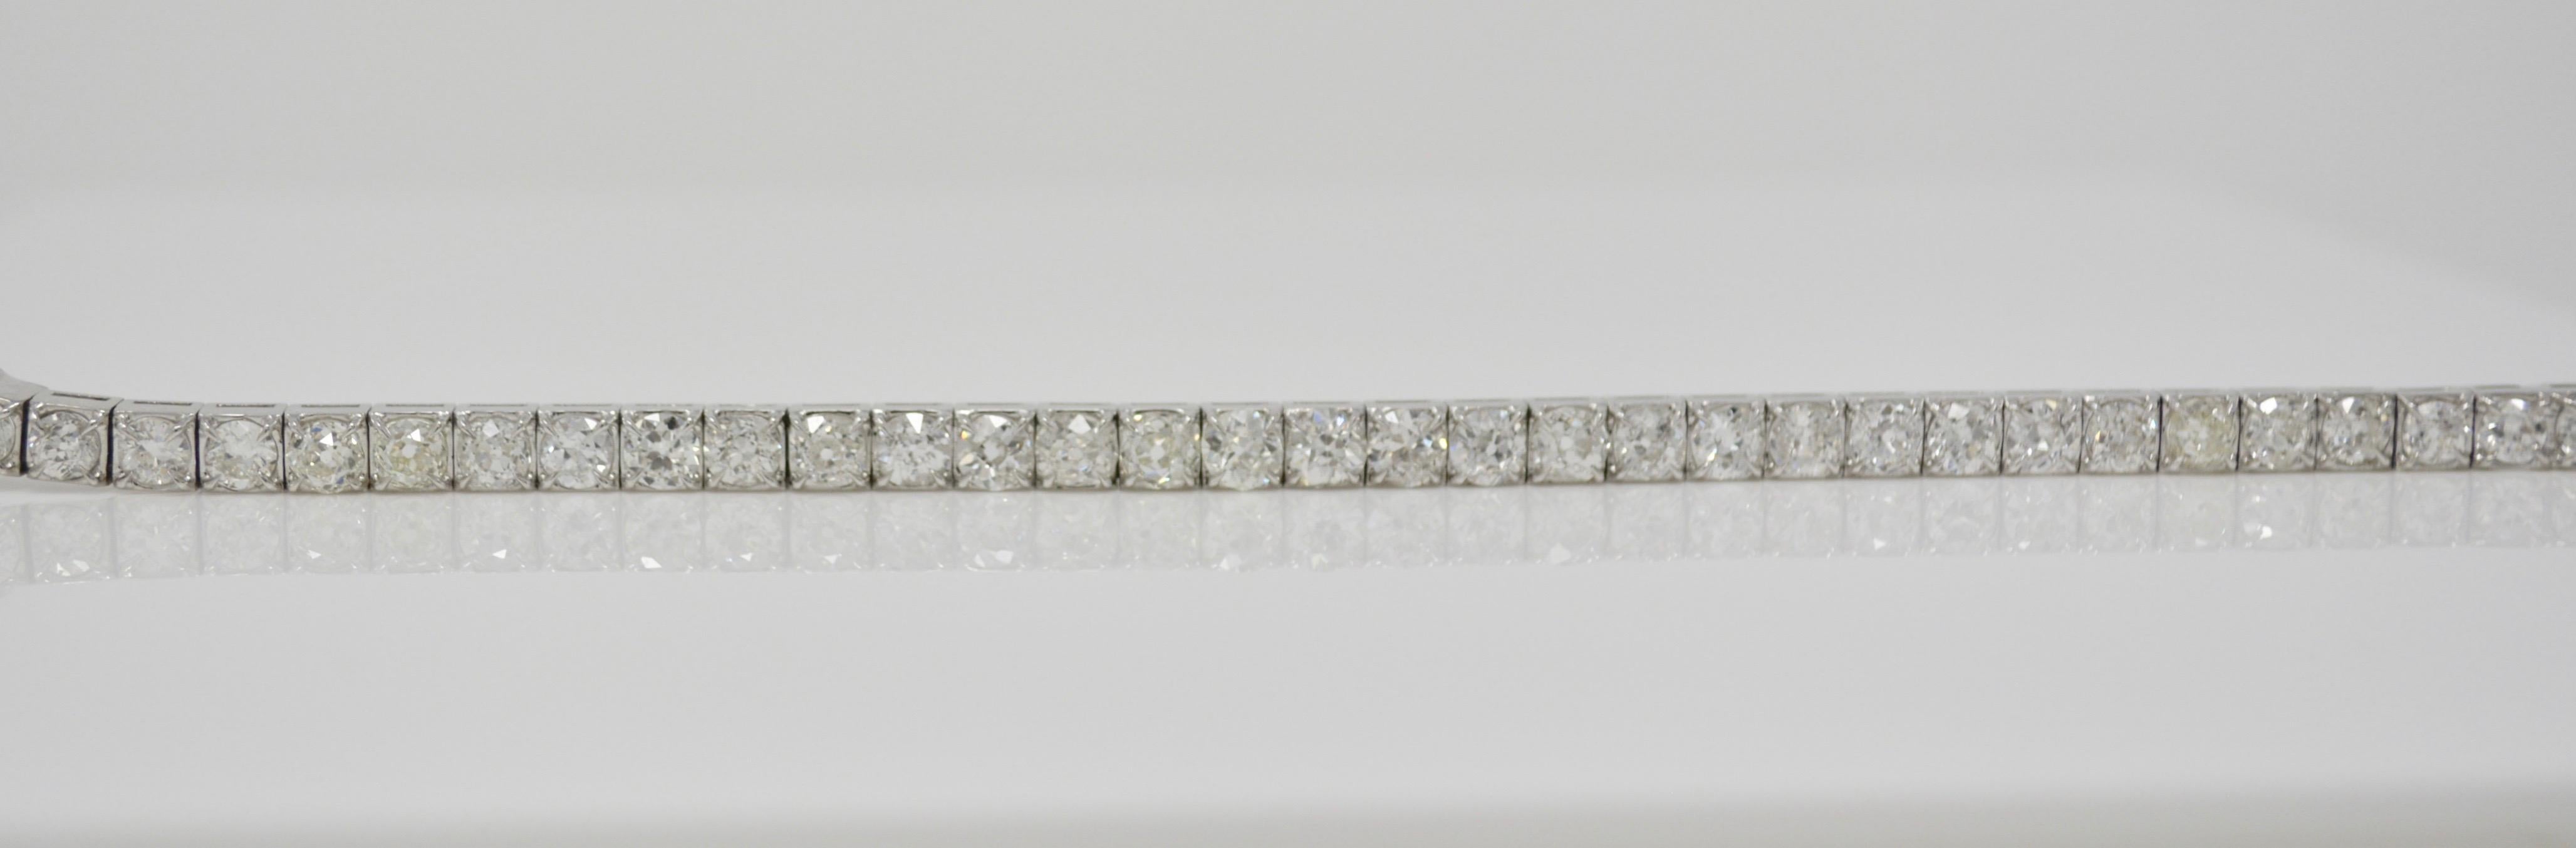 14.67 Carat Antique Old Mine Brilliant Diamond Bracelet in Platinum In New Condition For Sale In New York, NY